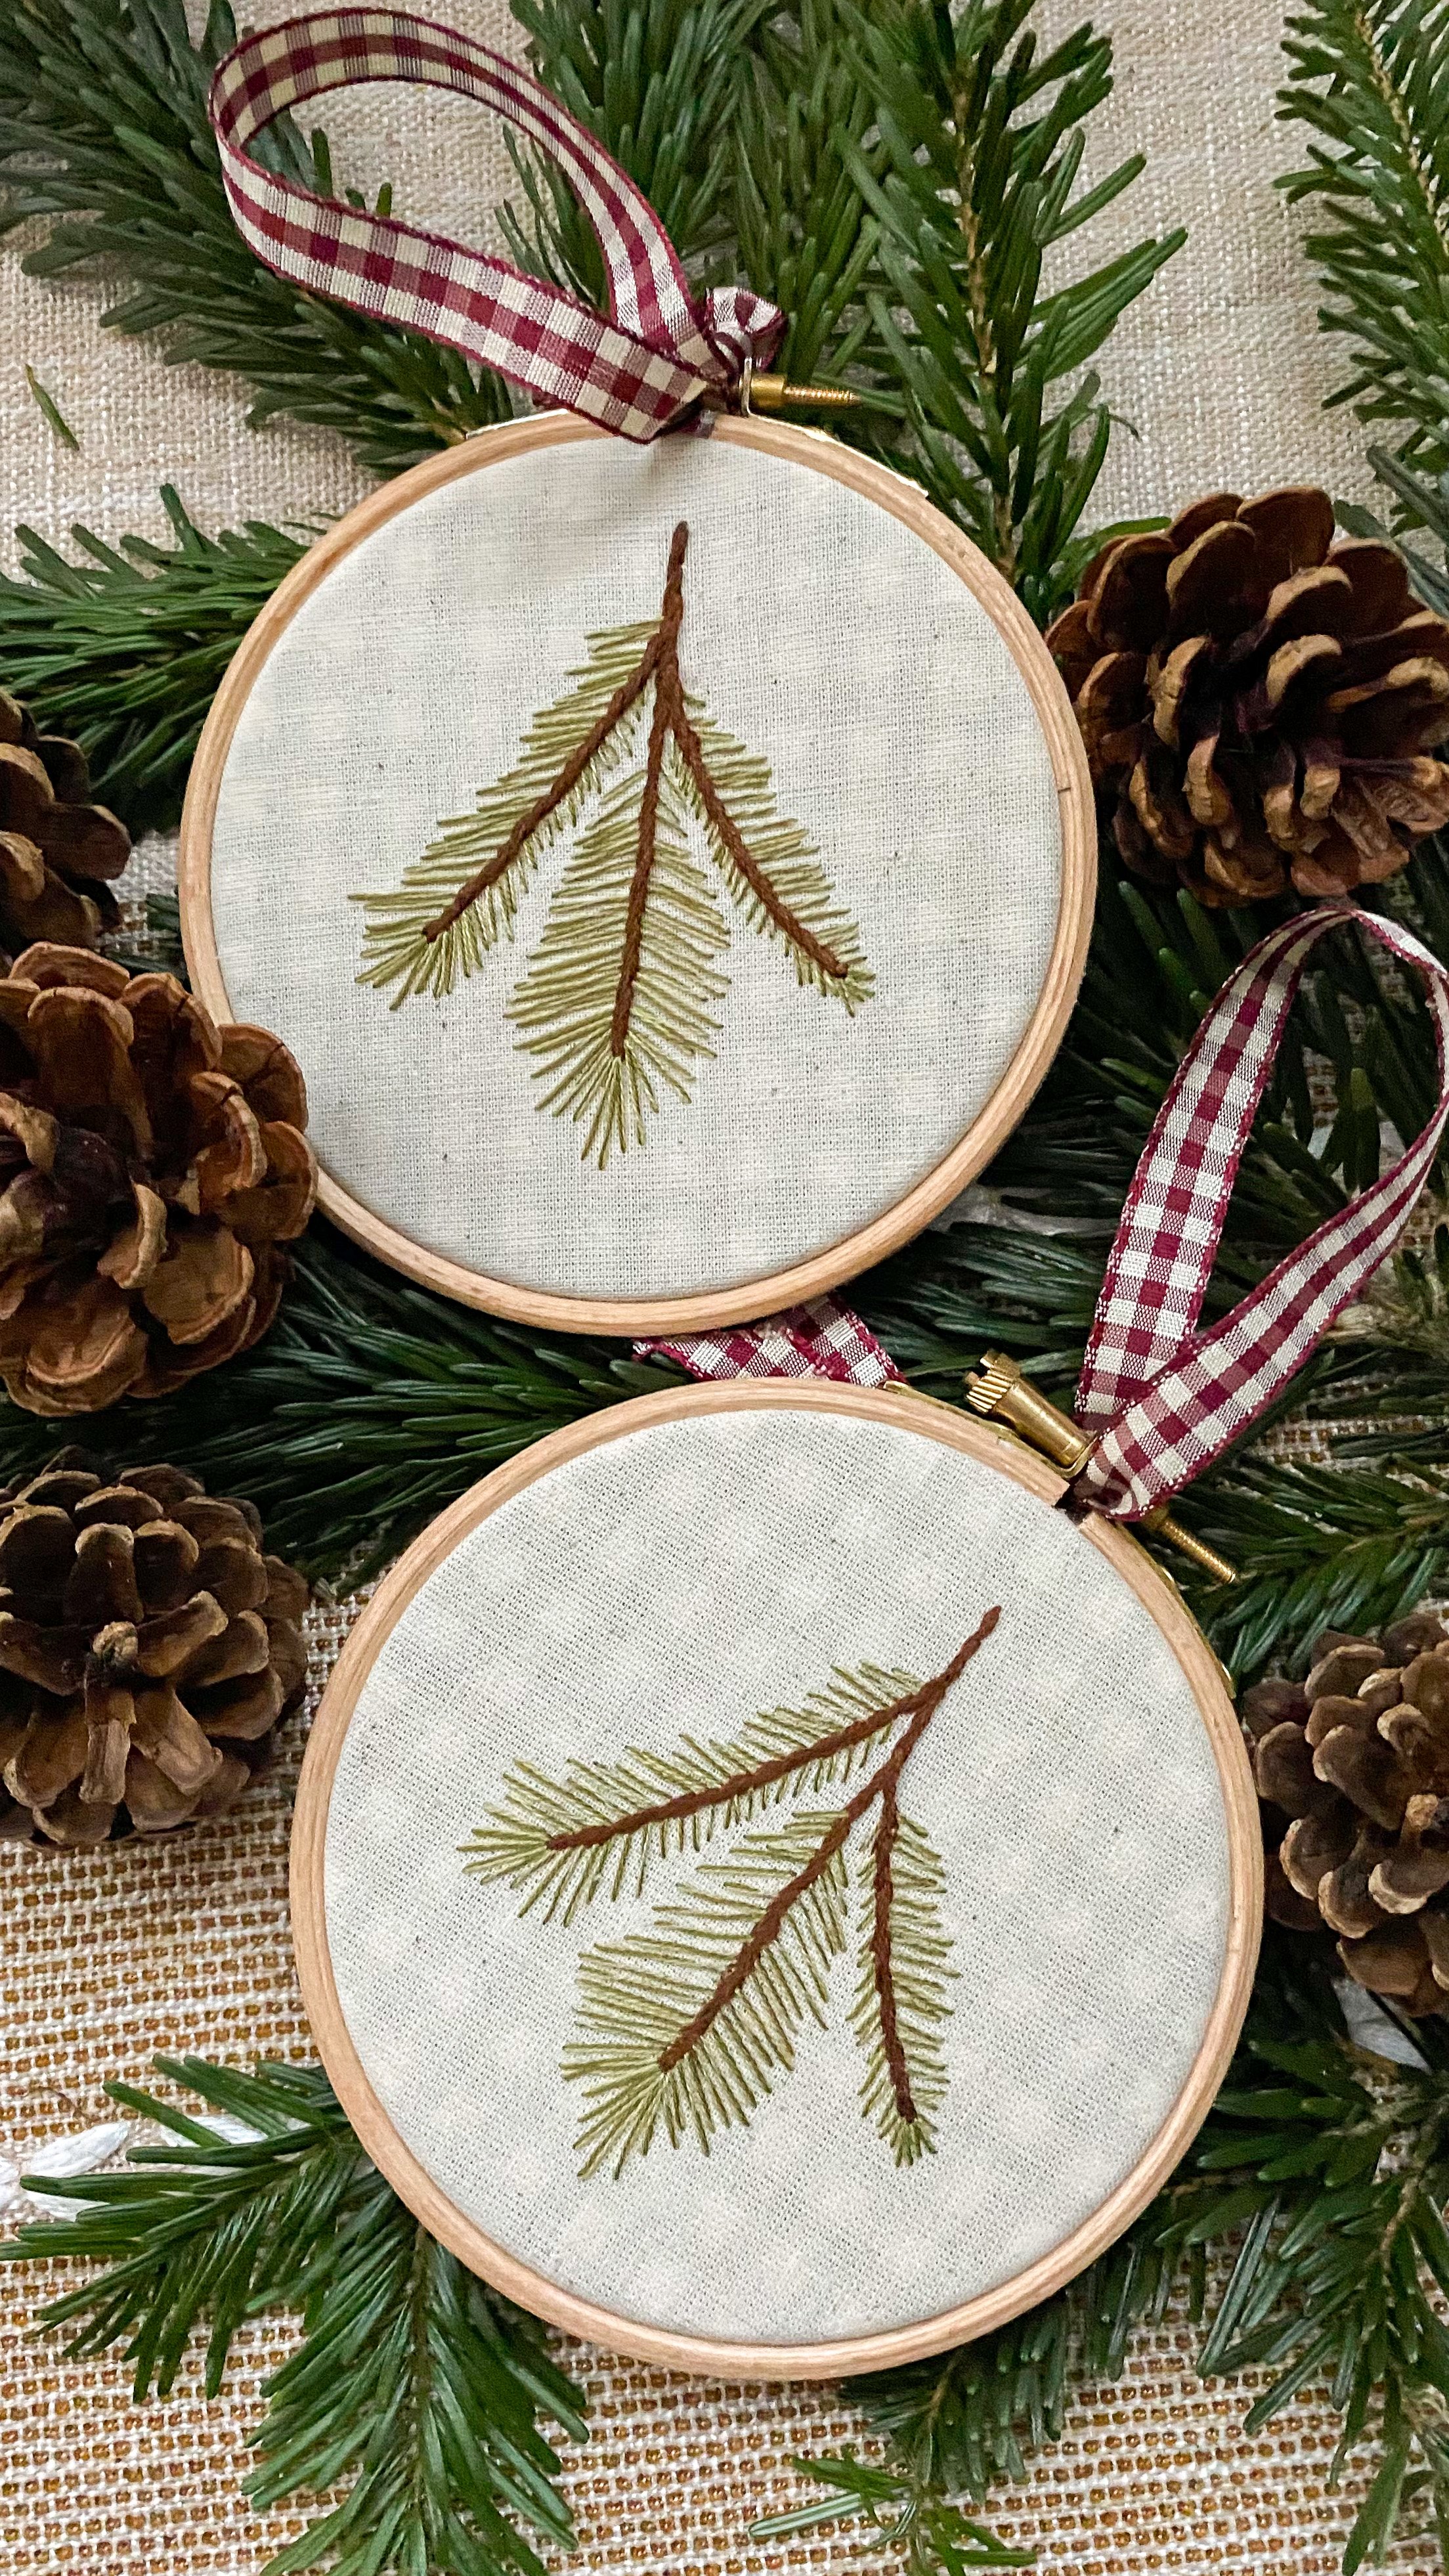 Festive Embroidery Workshop - Stitch your own decorations!